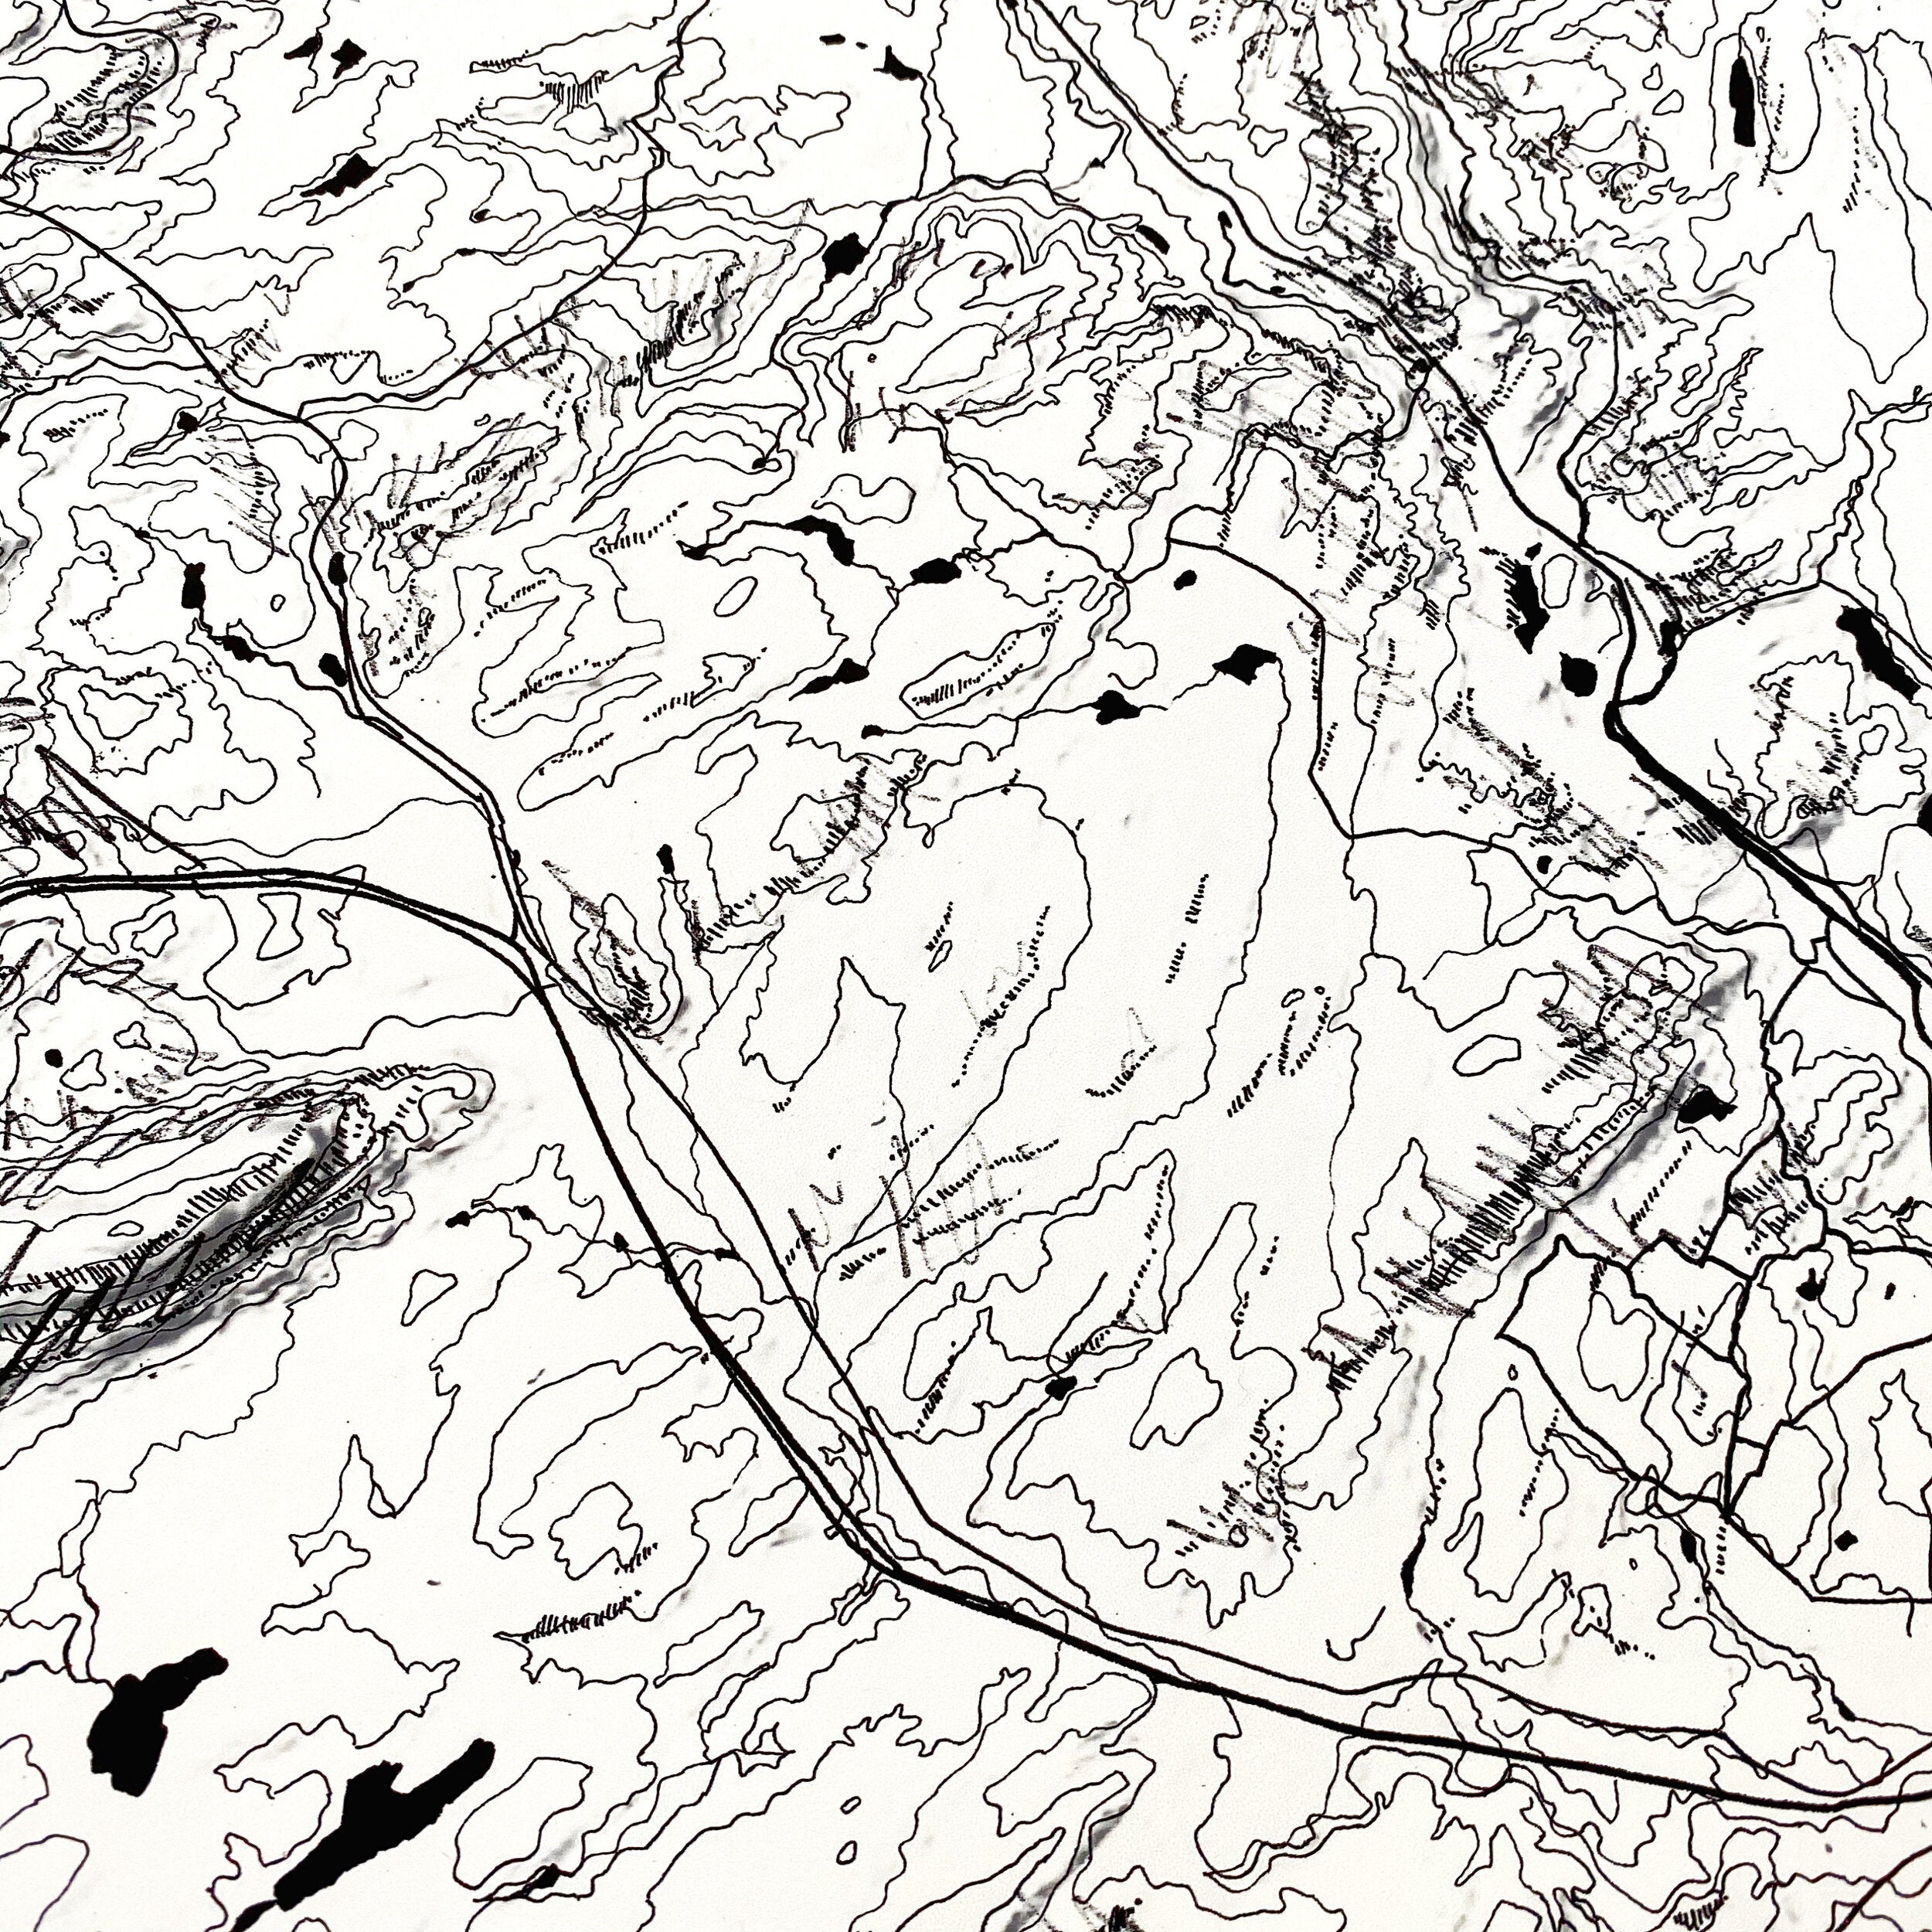 POCONOS Mountains Topographical Map Drawing: PRINT